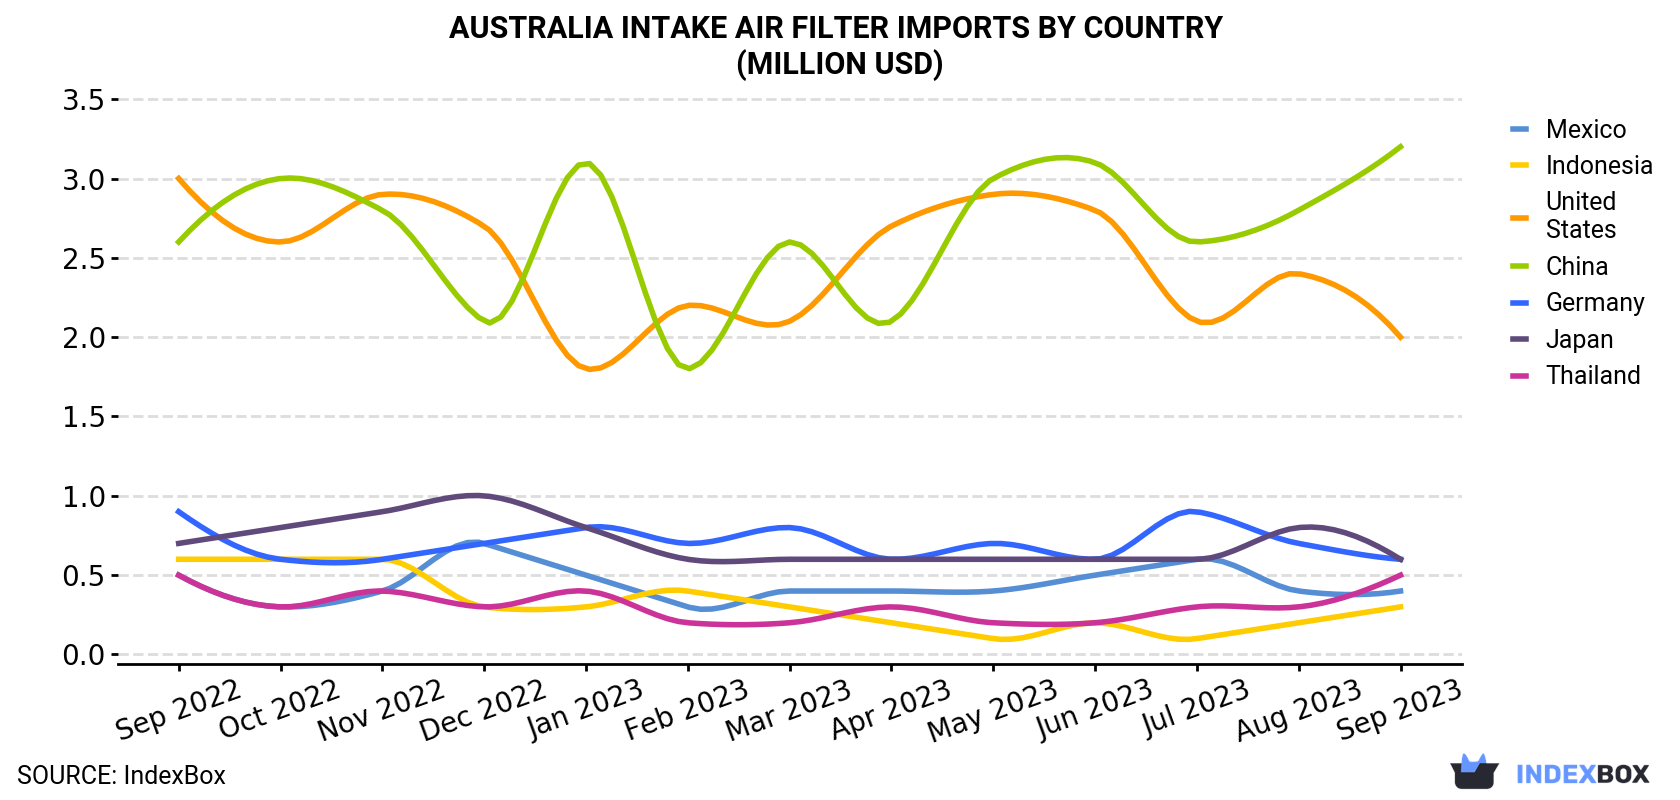 Australia Intake Air Filter Imports By Country (Million USD)